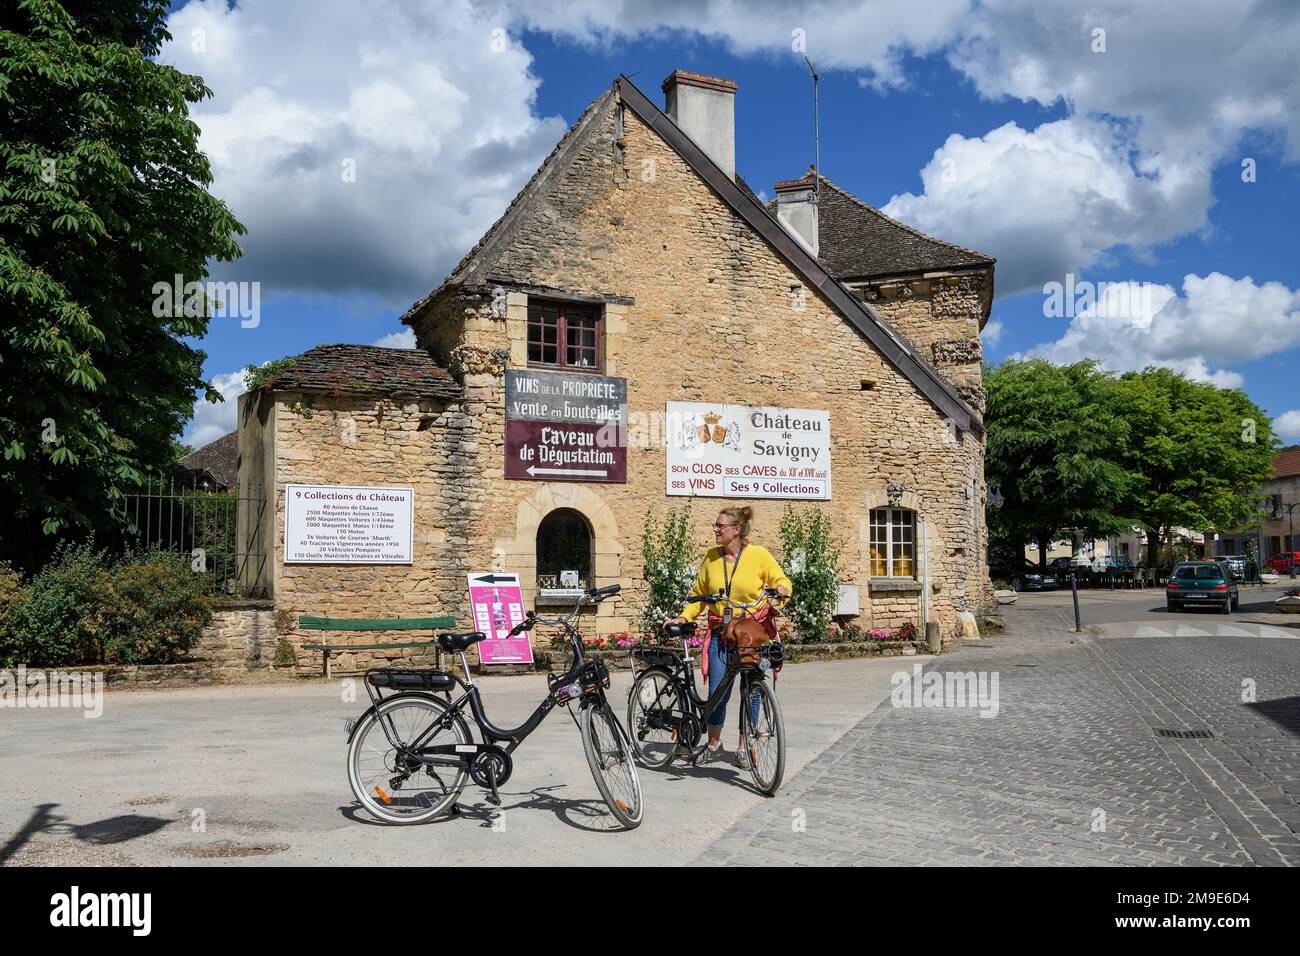 Cyclist in front of the Chateau de Savigny, winery, Savigny-les-Beaune, Departement Cote-d'Or, Burgundy, France Stock Photo